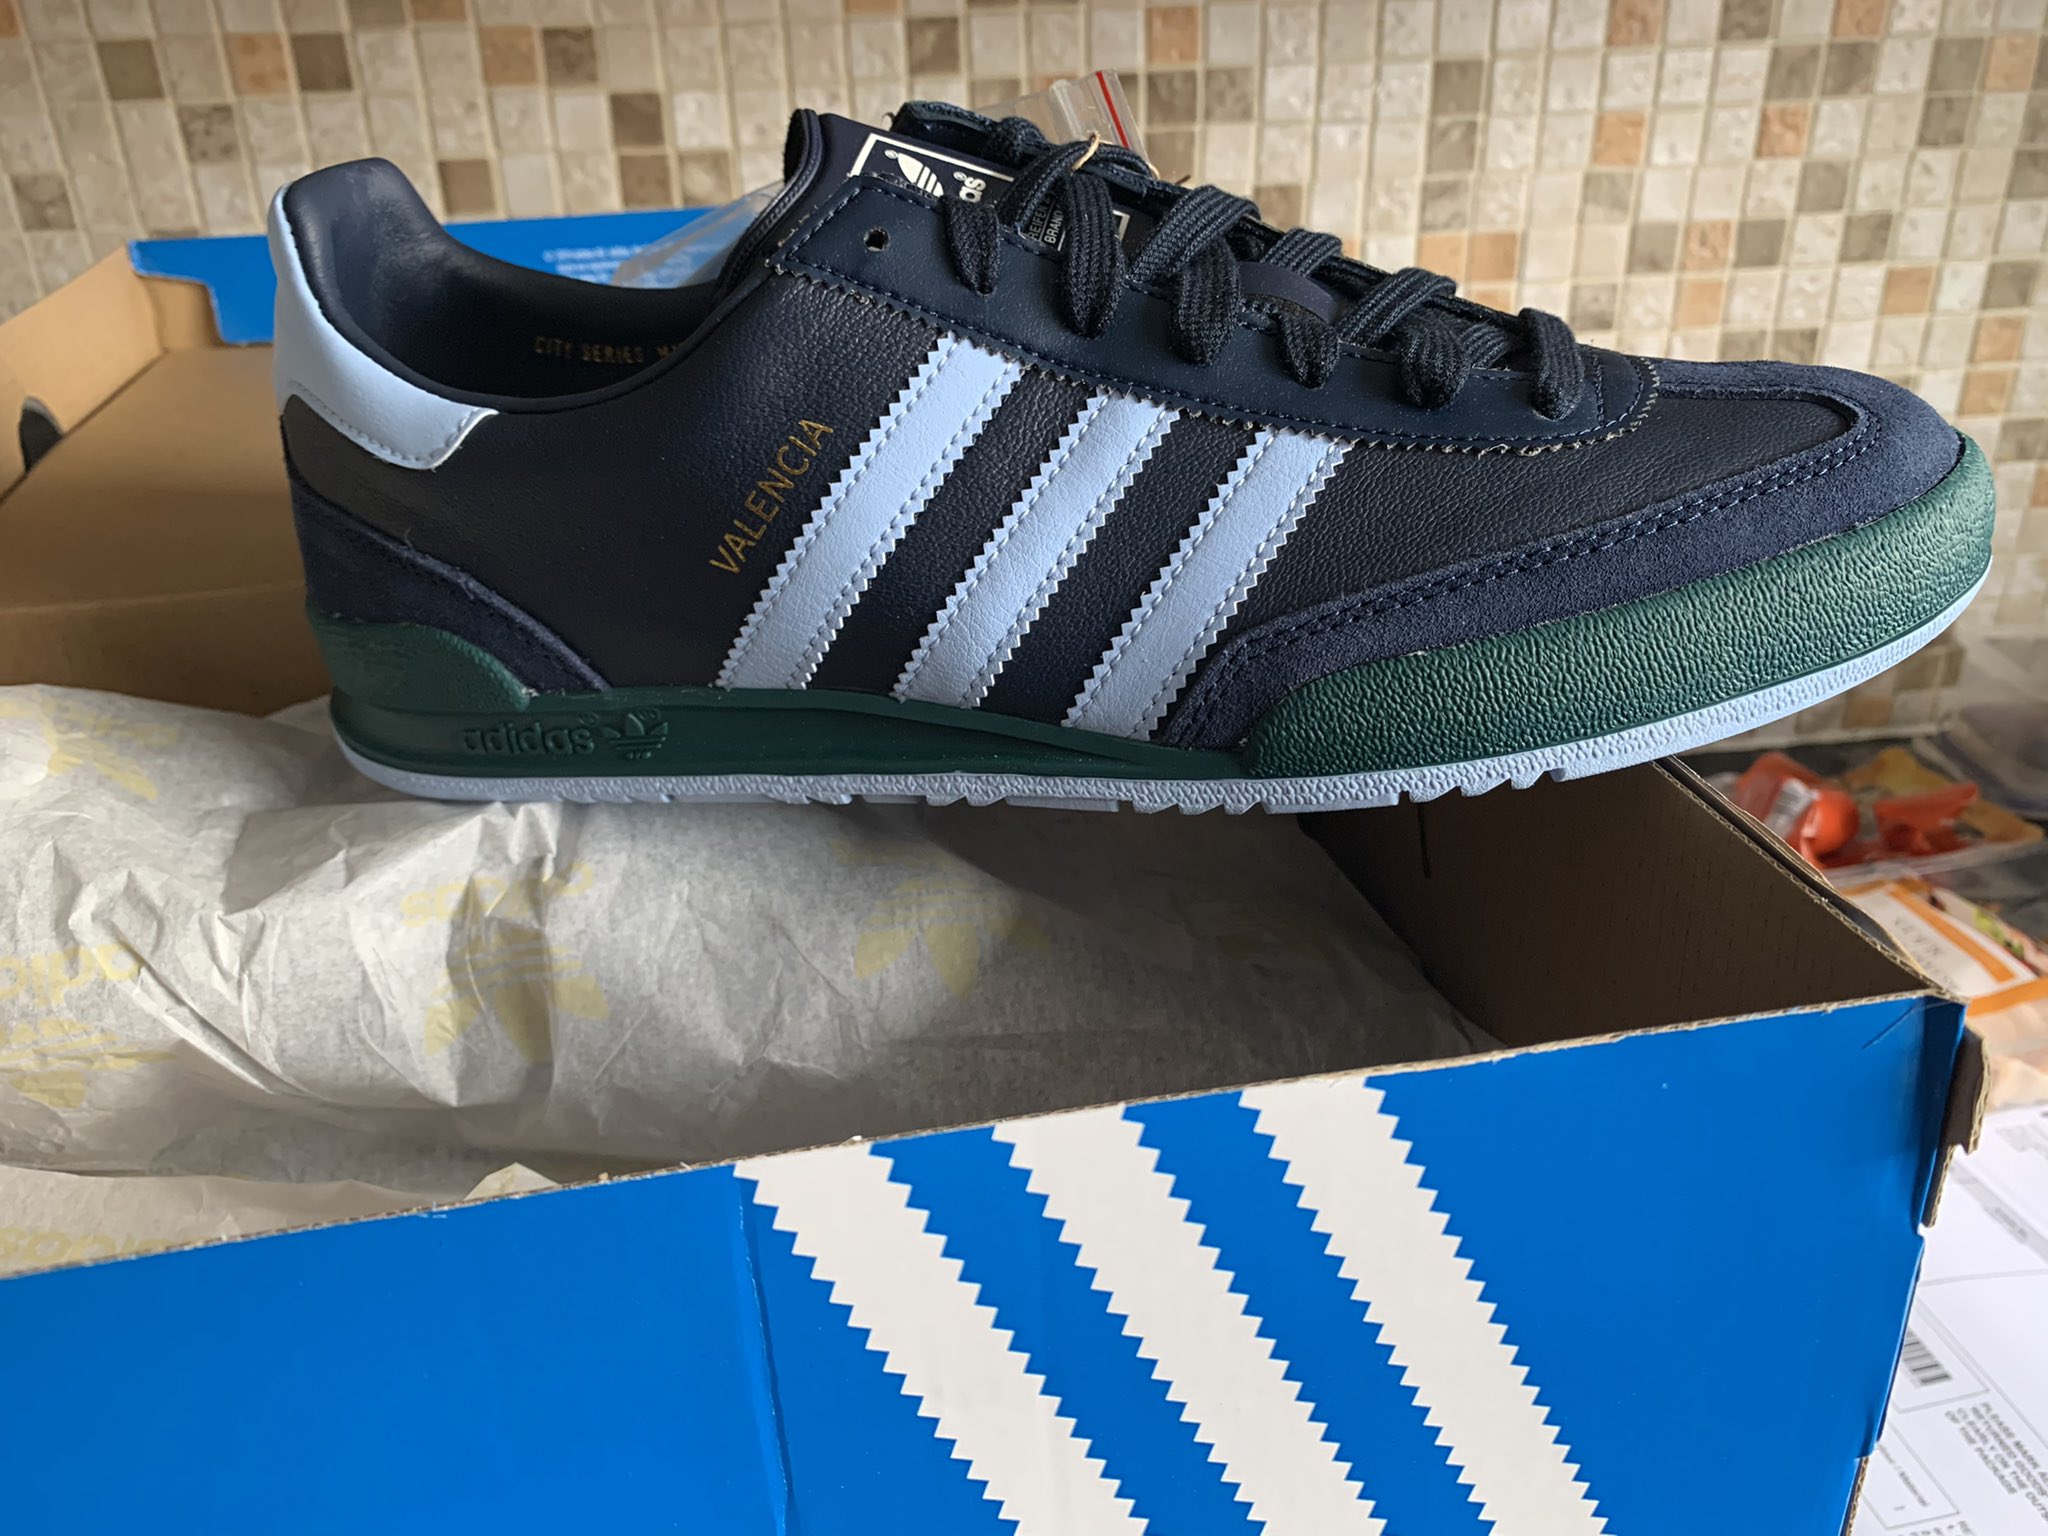 Lod on "#adidas #valencia best ever, you just enter and you win!!! Thanks @man_savings for the tip again. https://t.co/zMw1dpm0Wp" / Twitter